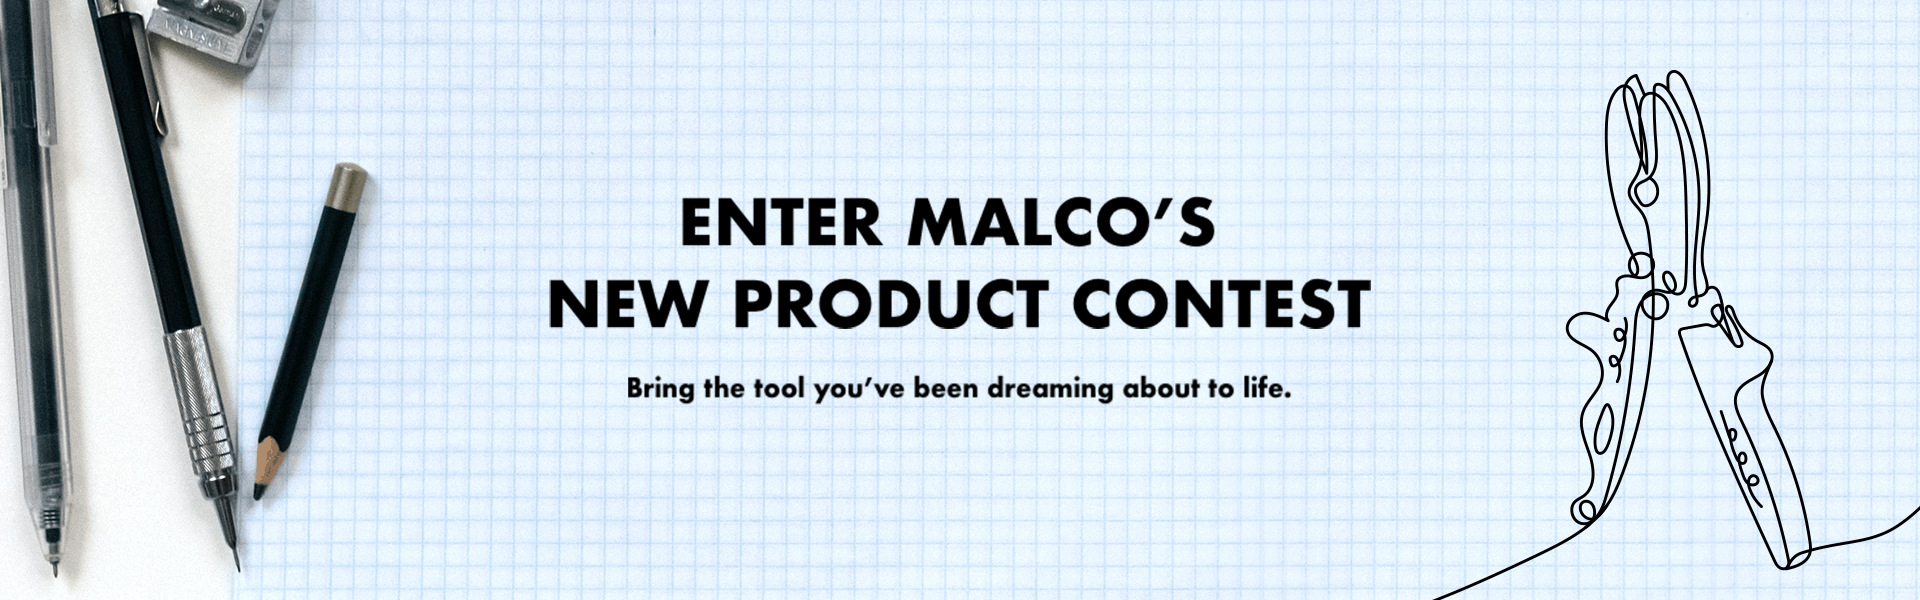 Enter Malco’s New Product Contest Subhead: Bring the tool you’ve been dreaming about to life.